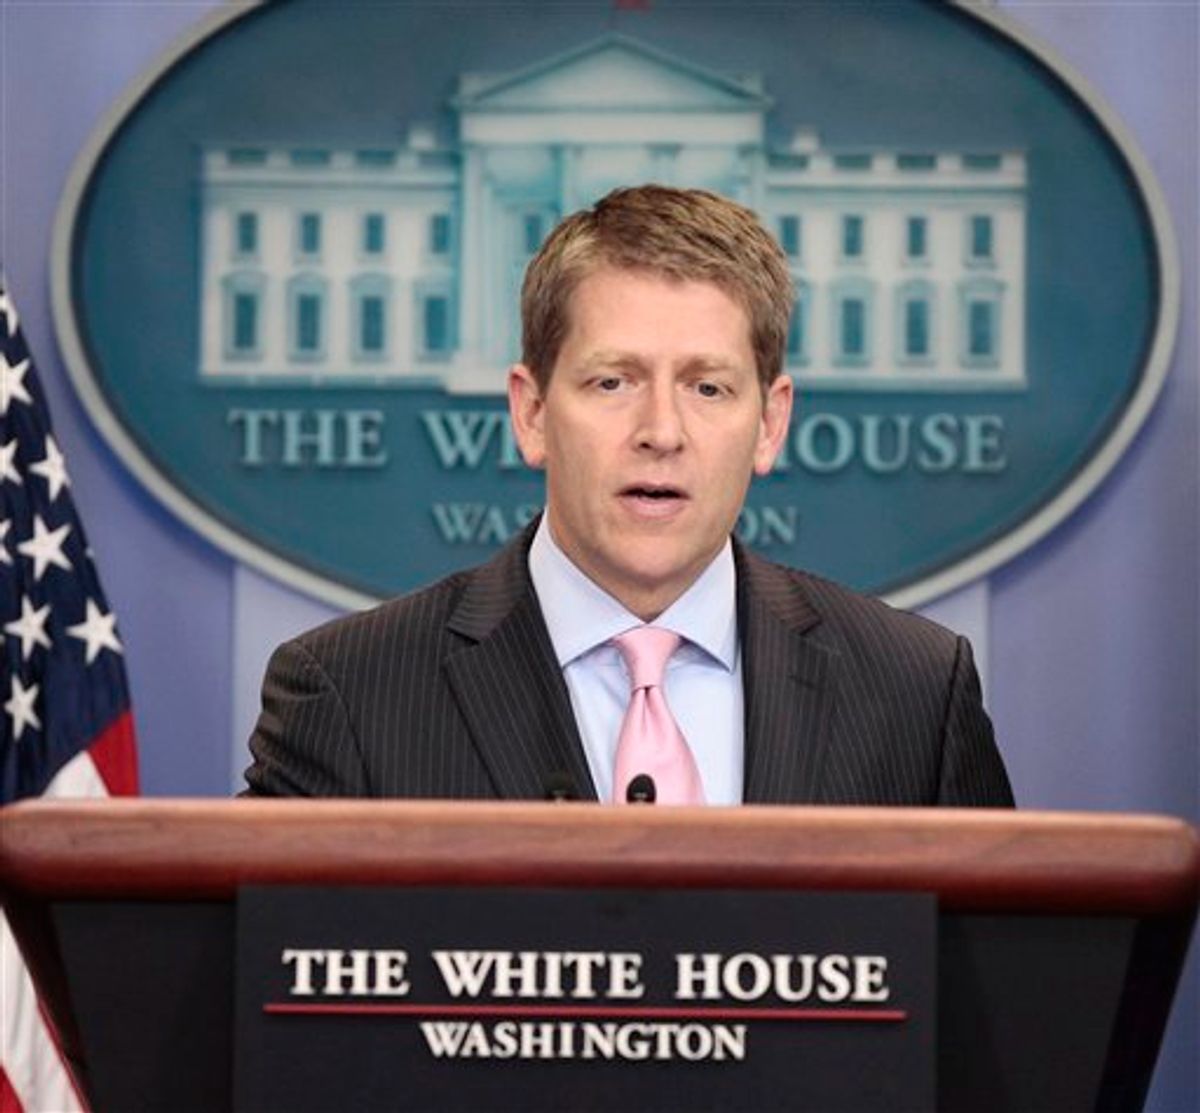 White House Press Secretary Jay Carney speaks during his daily news briefing at the White House in Washington, Monday, July, 18, 2011. (AP Photo/Pablo Martinez Monsivais)   (AP)